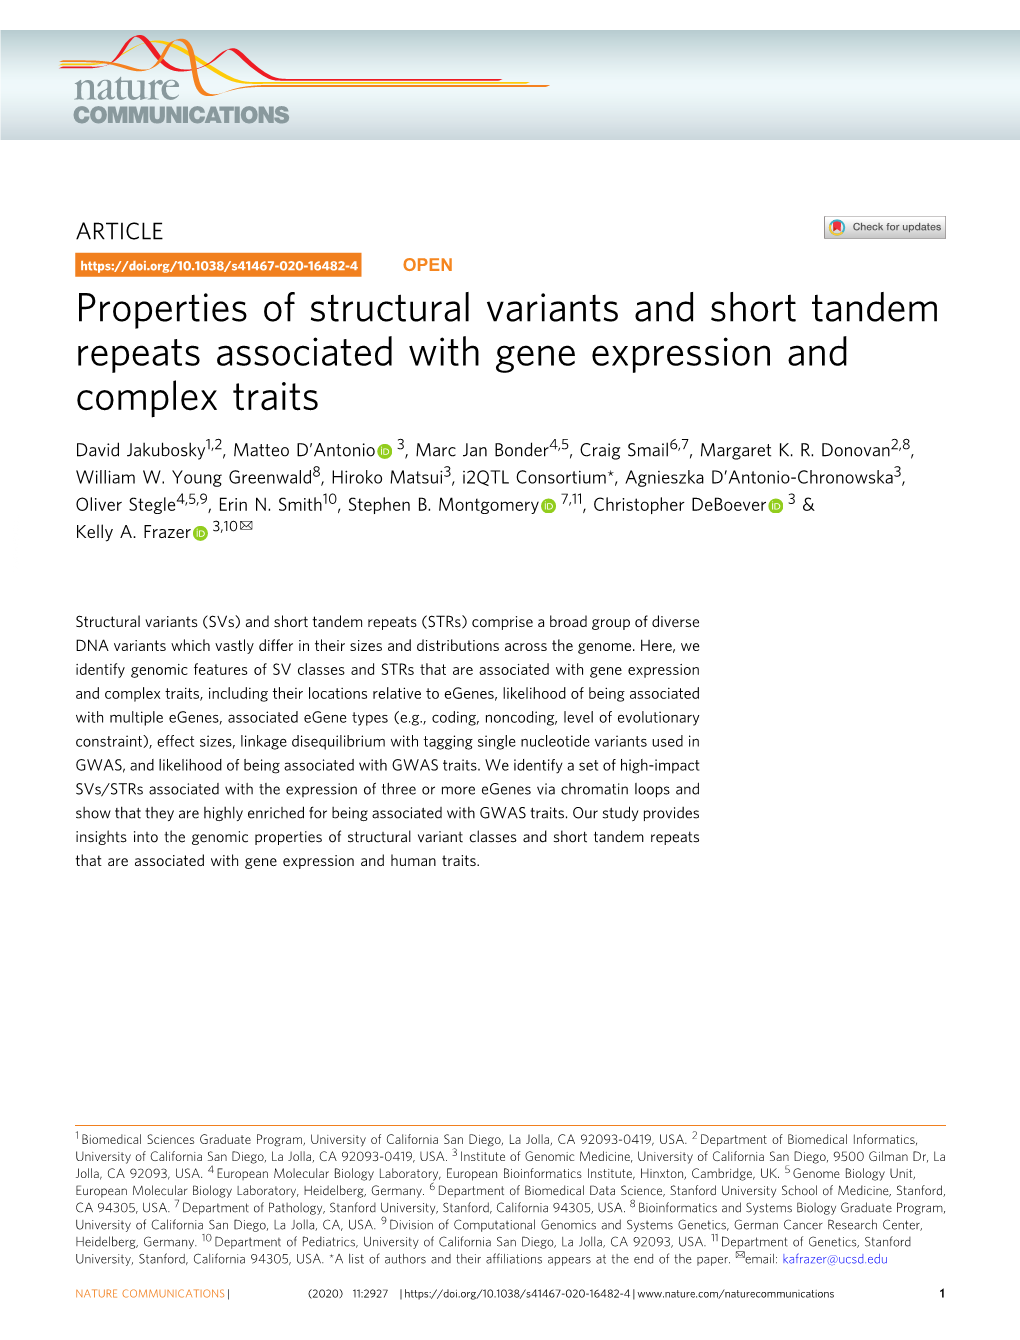 Properties of Structural Variants and Short Tandem Repeats Associated with Gene Expression and Complex Traits